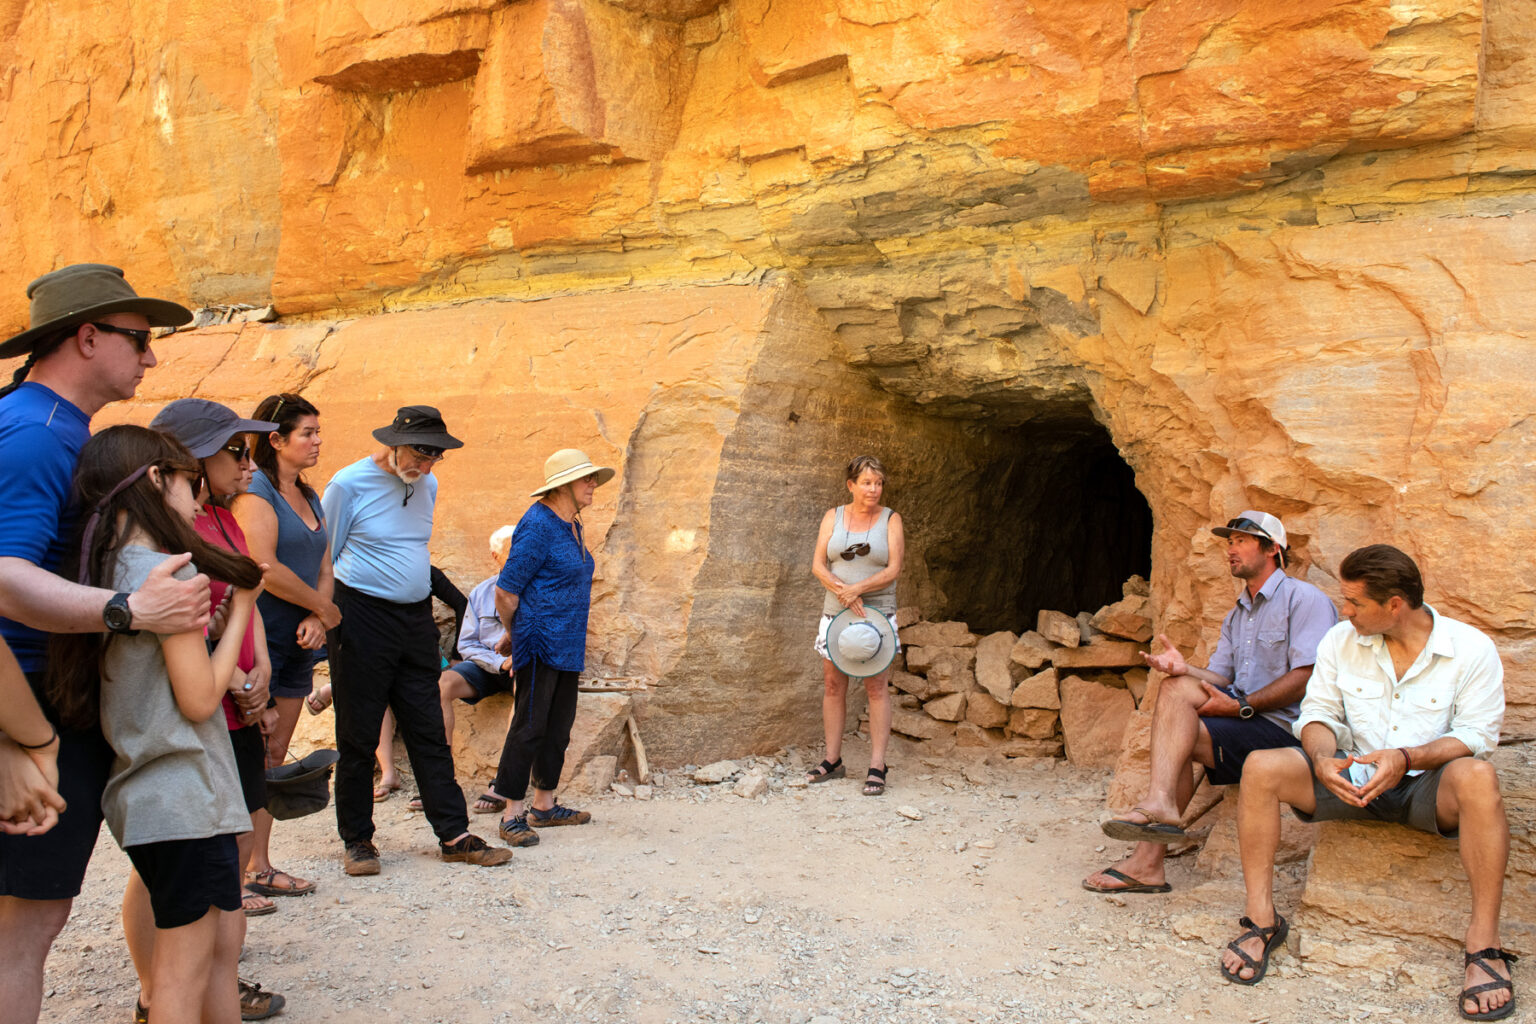 OARS guide provides interpretive talk to guests at an ancient granary near the Colorado River in Grand Canyon